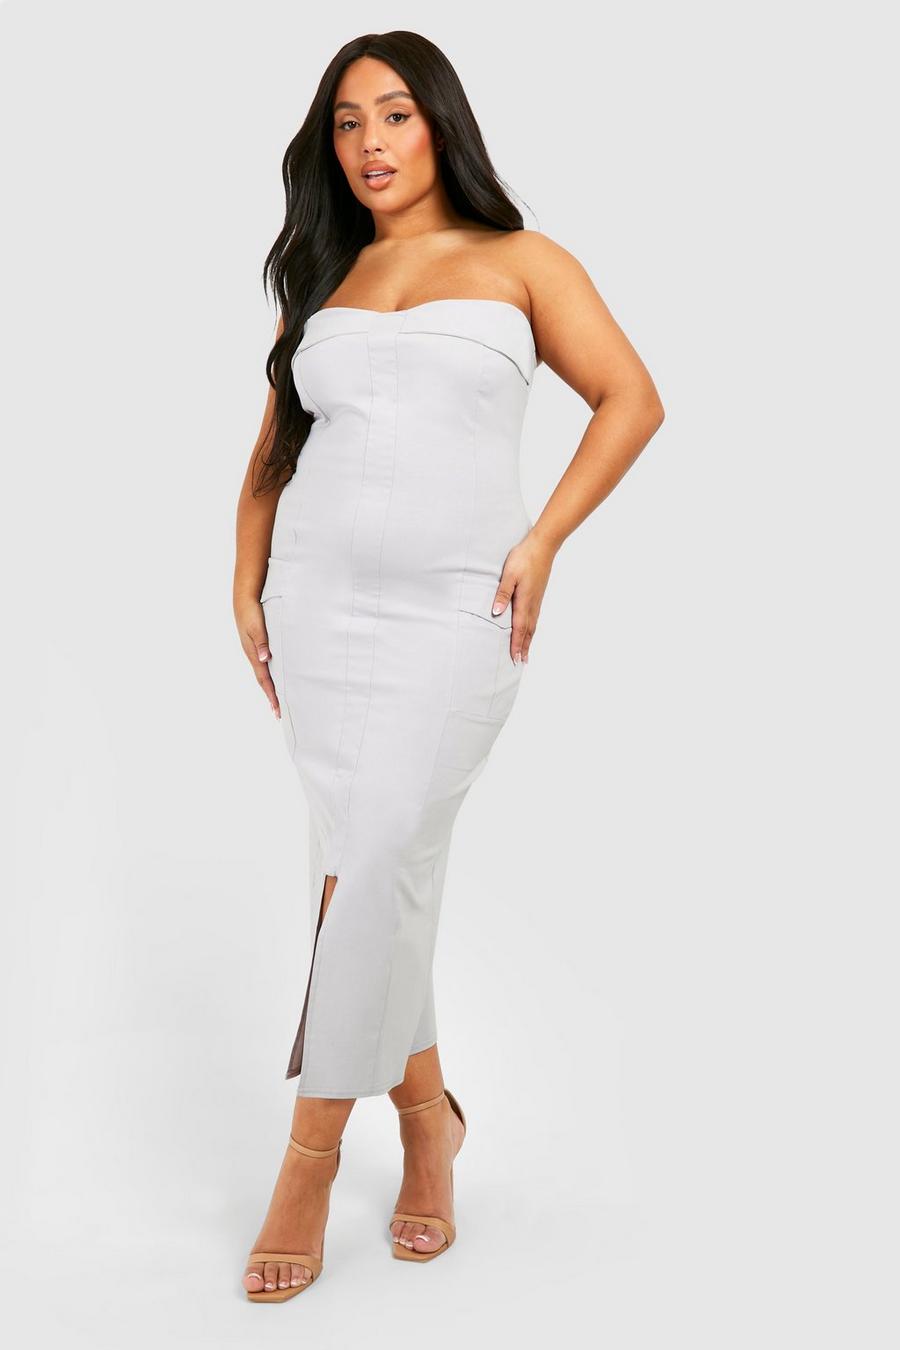 Grande taille - Robe mi-longue utilitaire, Ice grey image number 1